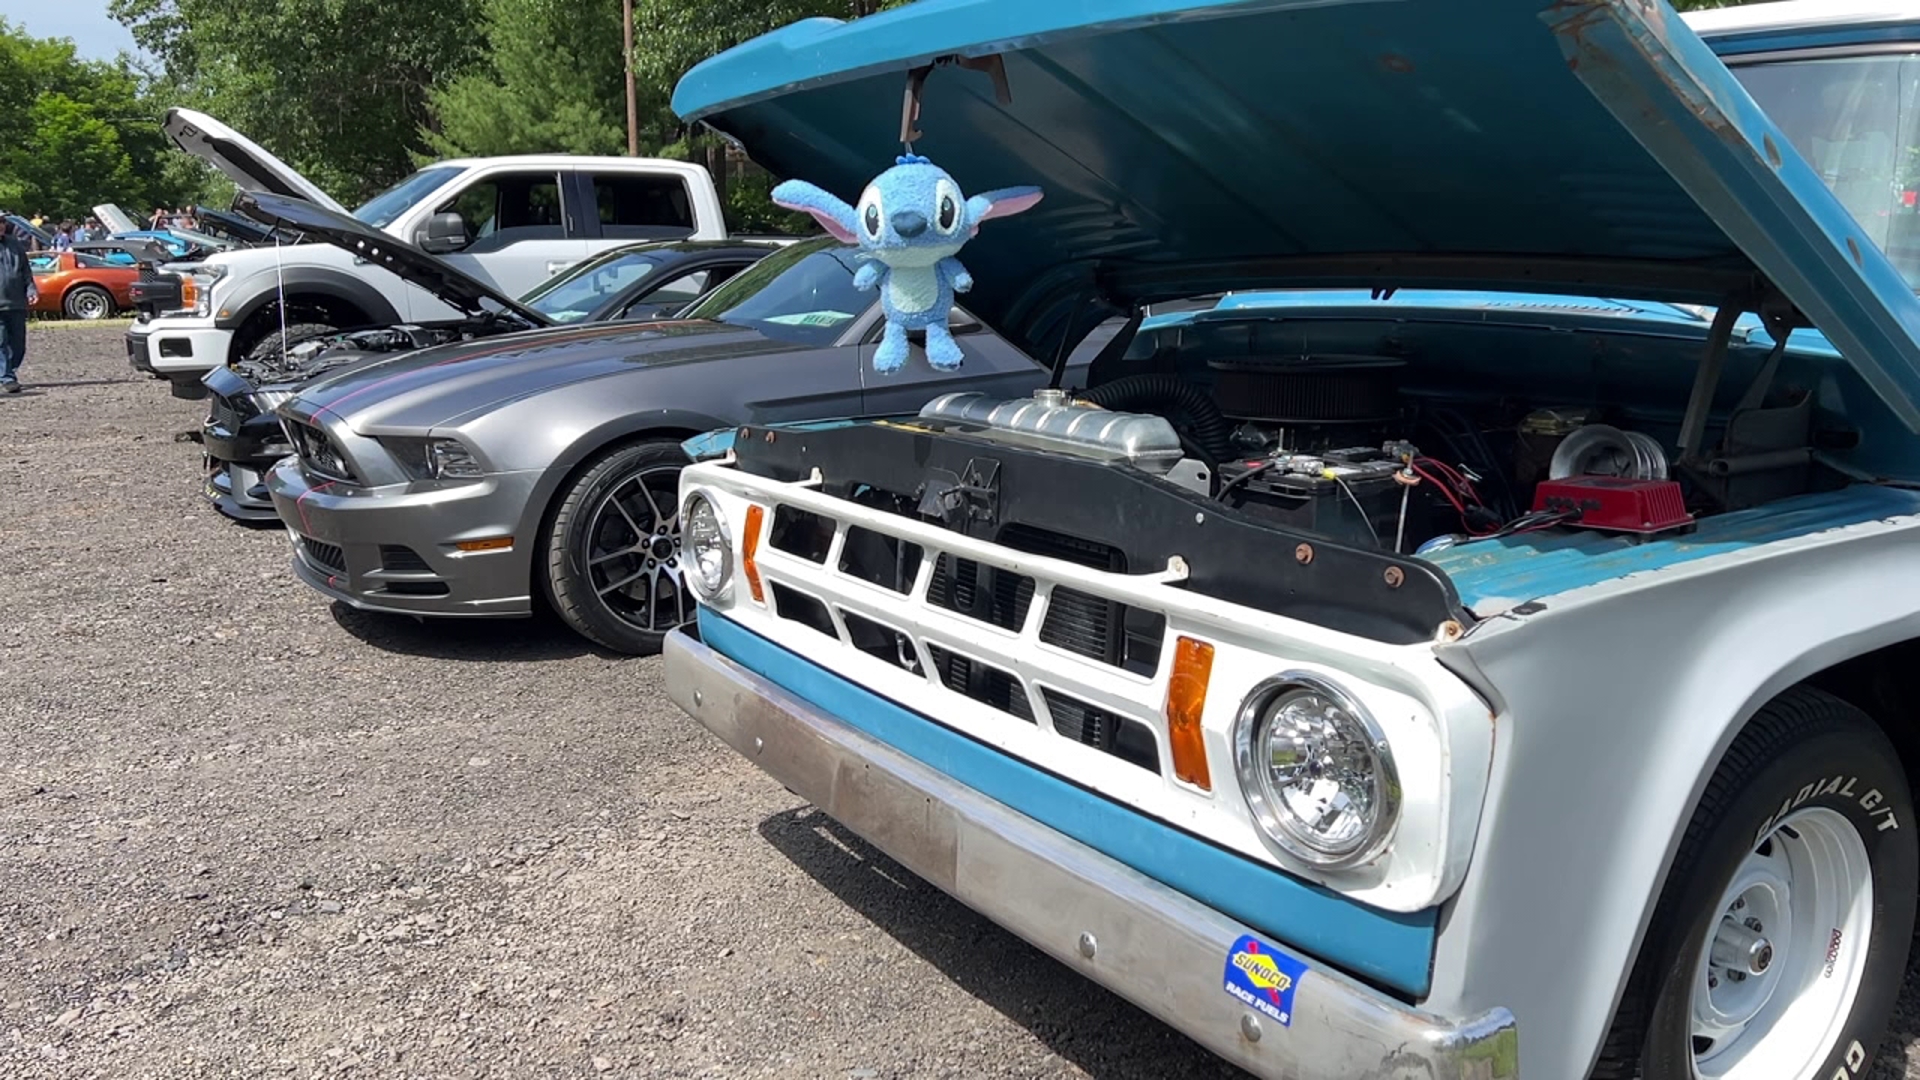 The Villa Capri Cruisers Father's Day Car Show returned to Nay Aug Park on Sunday.